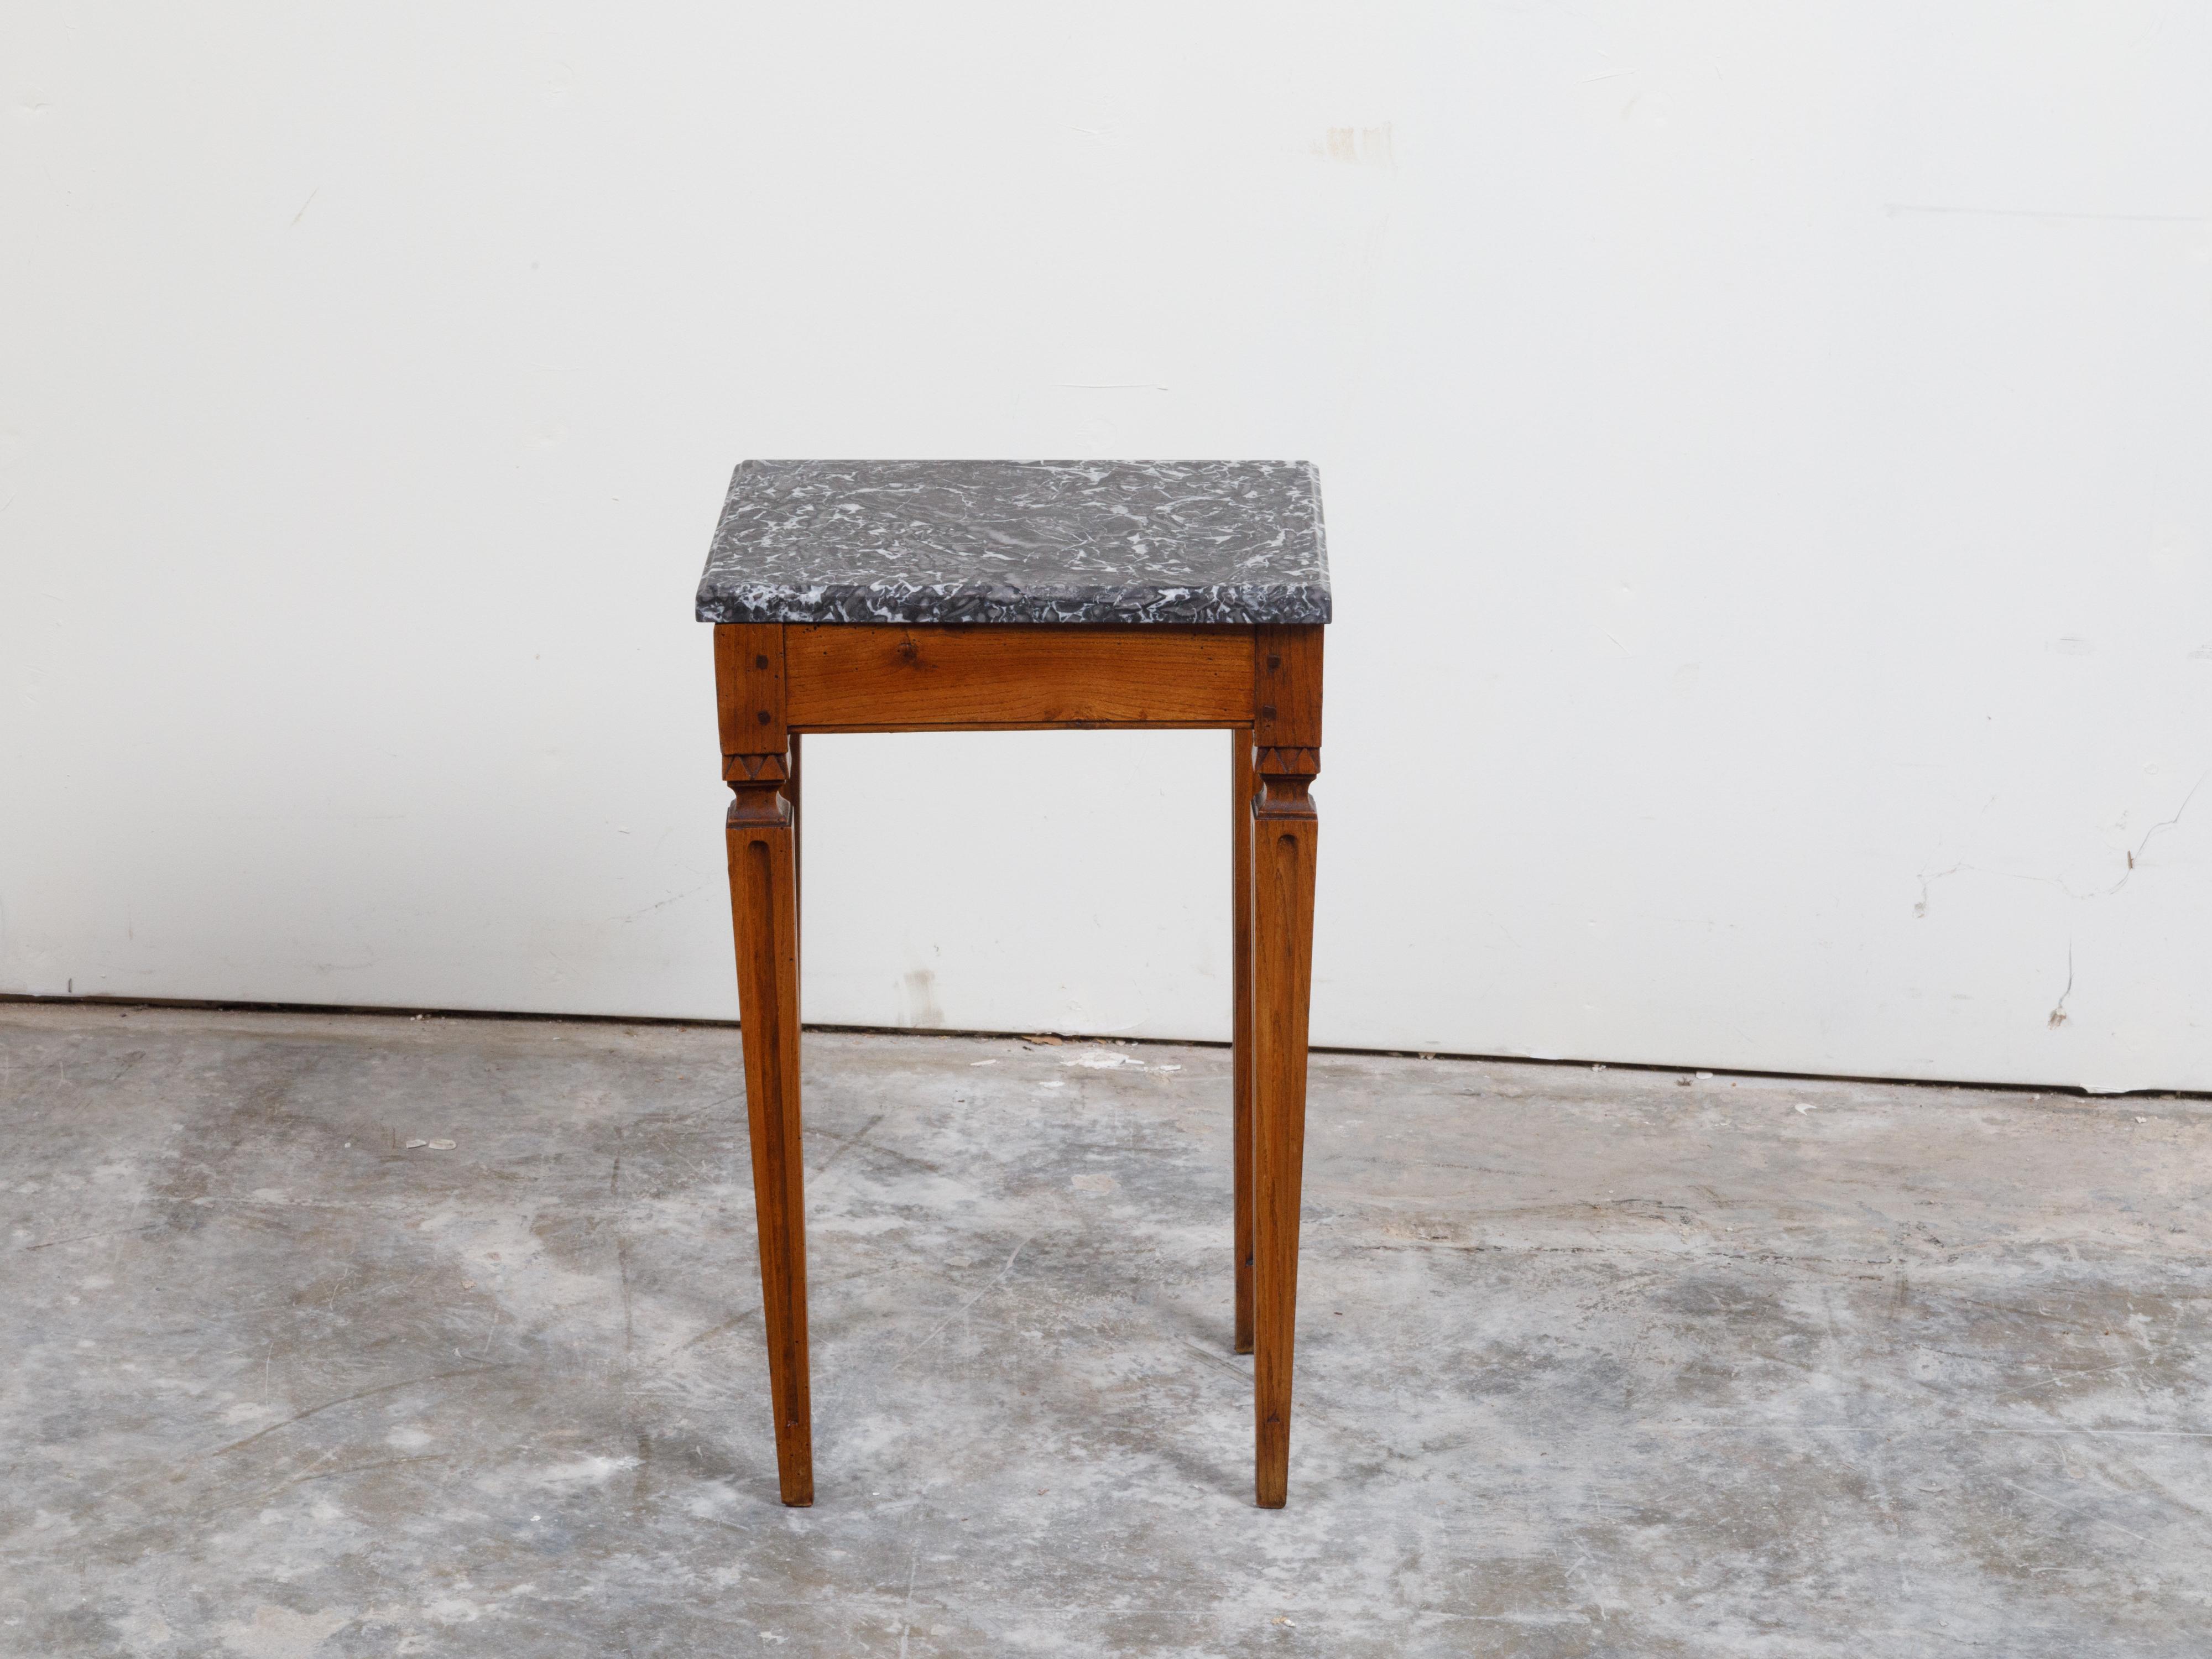 A French Neoclassical style wooden side table from the 19th century, with grey marble top and fluted legs. Created in France during the 19th century, this side table features a rectangular grey veined marble top sitting above an apron carved with